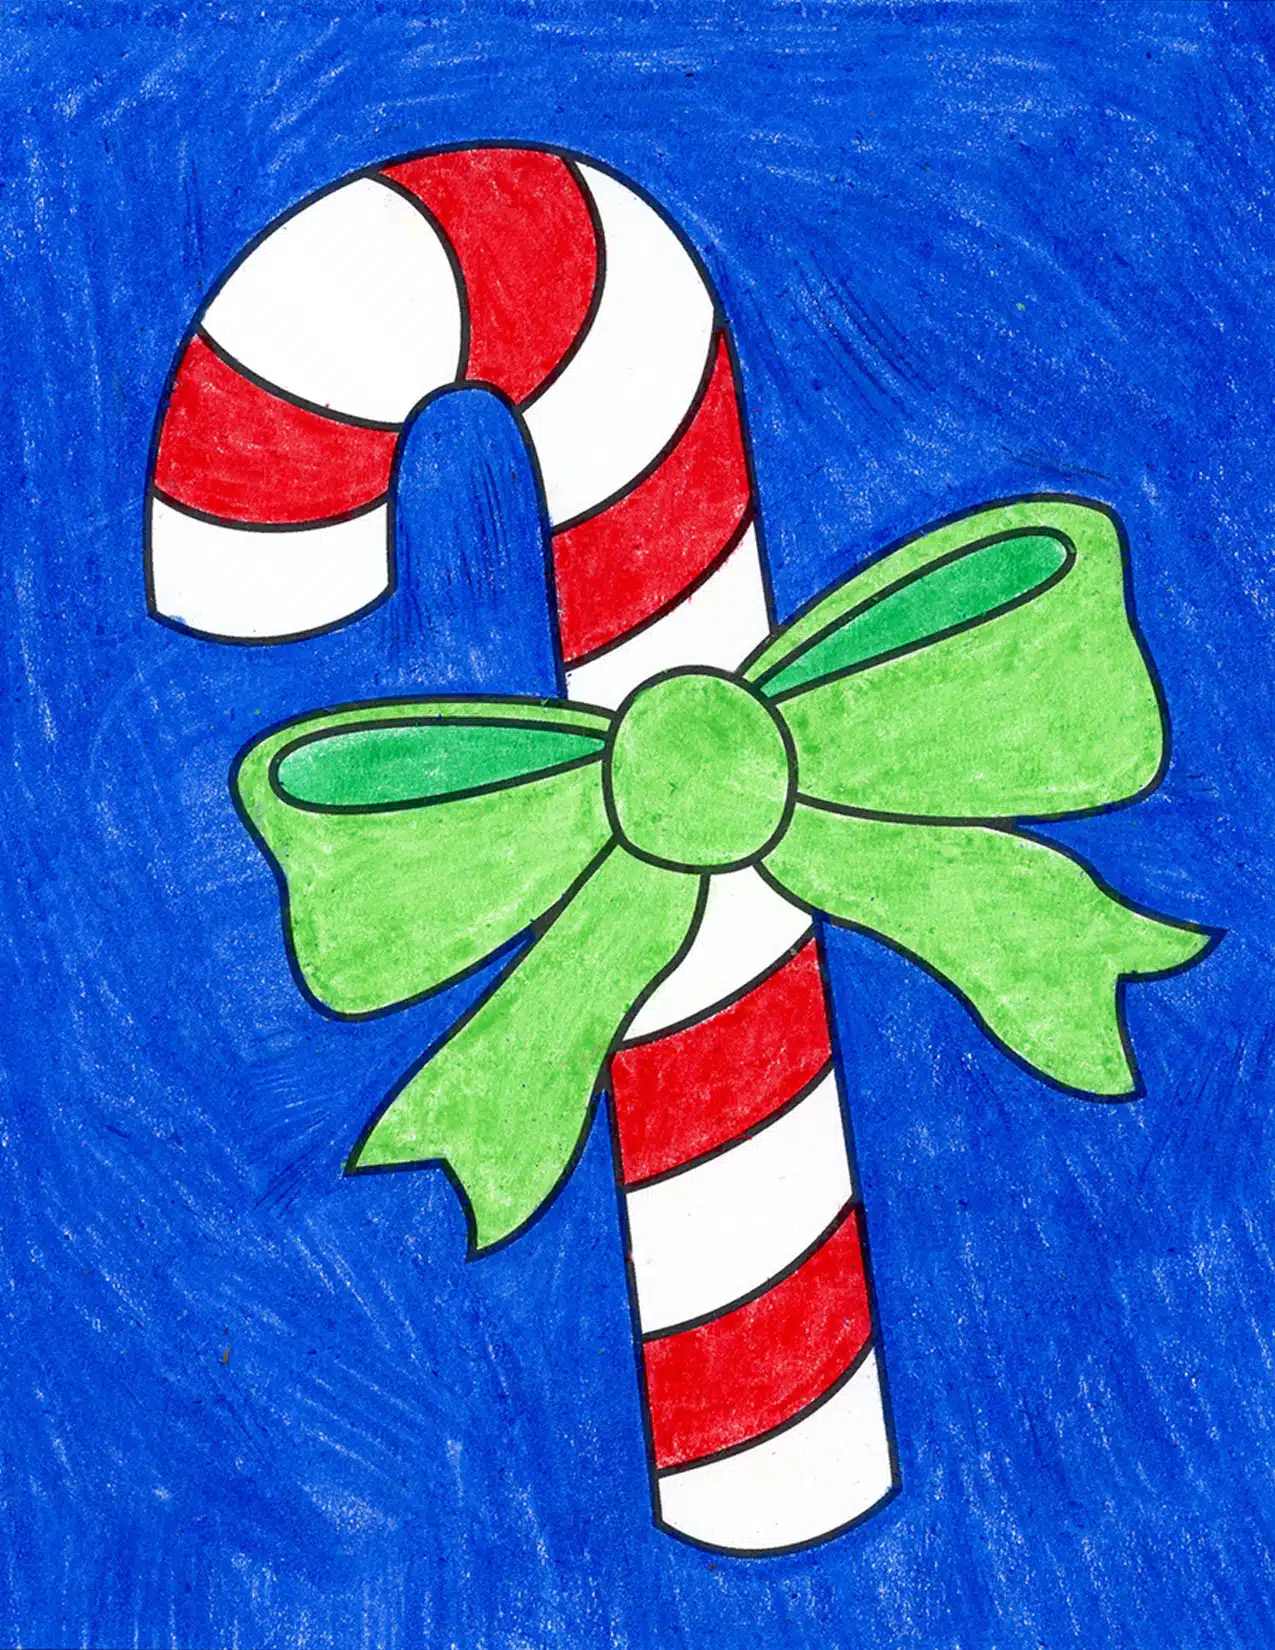 Easy How to Draw a Candy Cane Tutorial Video and Candy Cane Coloring Page